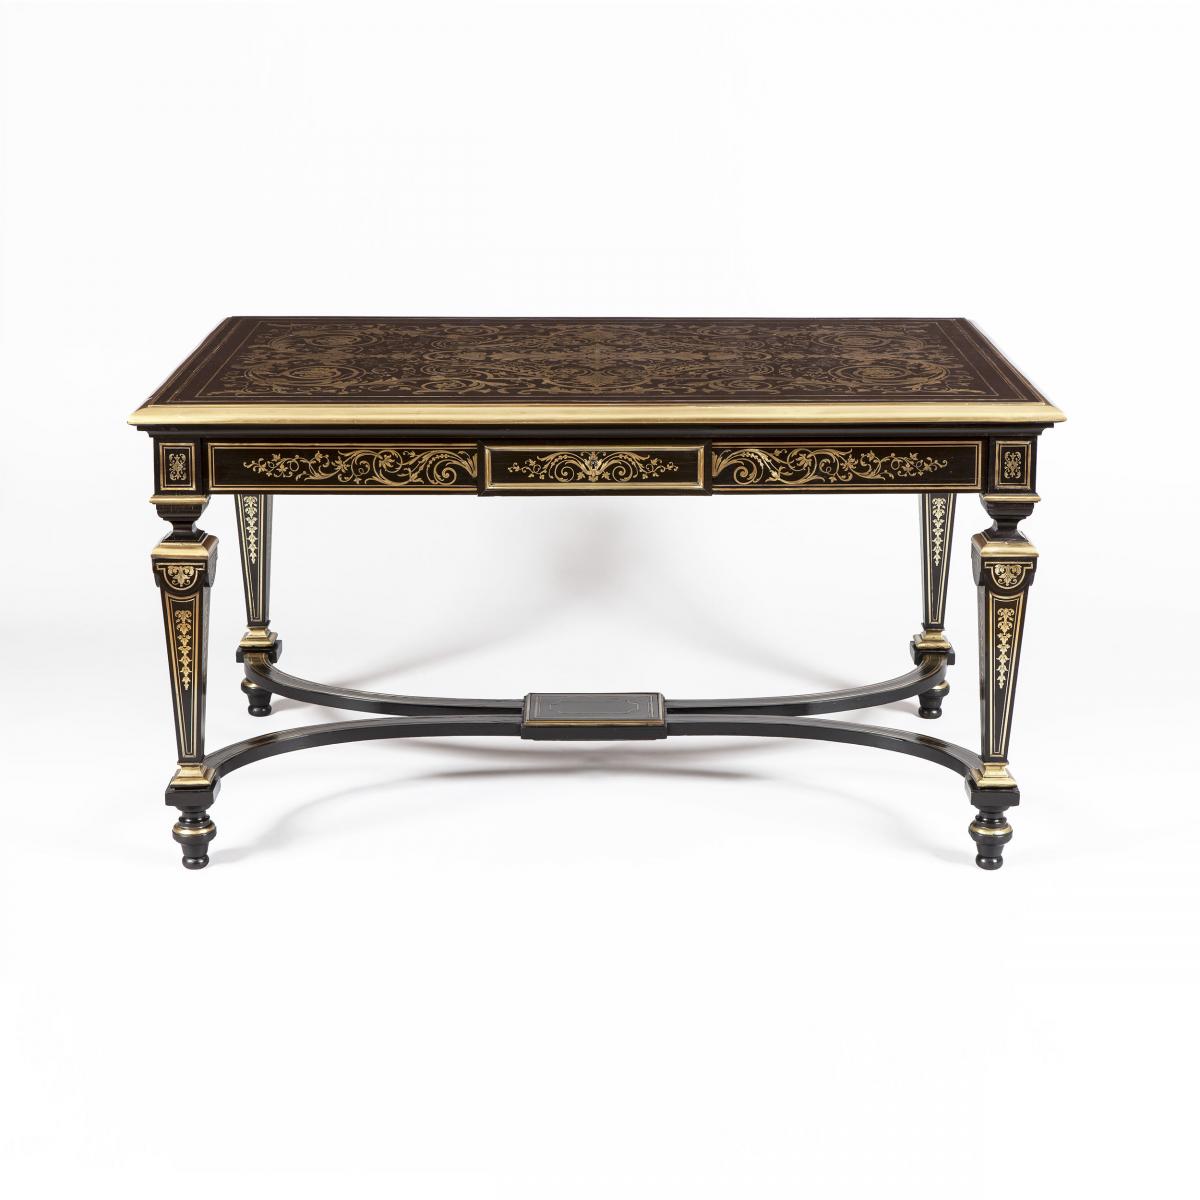 Centre Table in the Manner of Andre-Charles Boulle By Charles-Guillaume Diehl